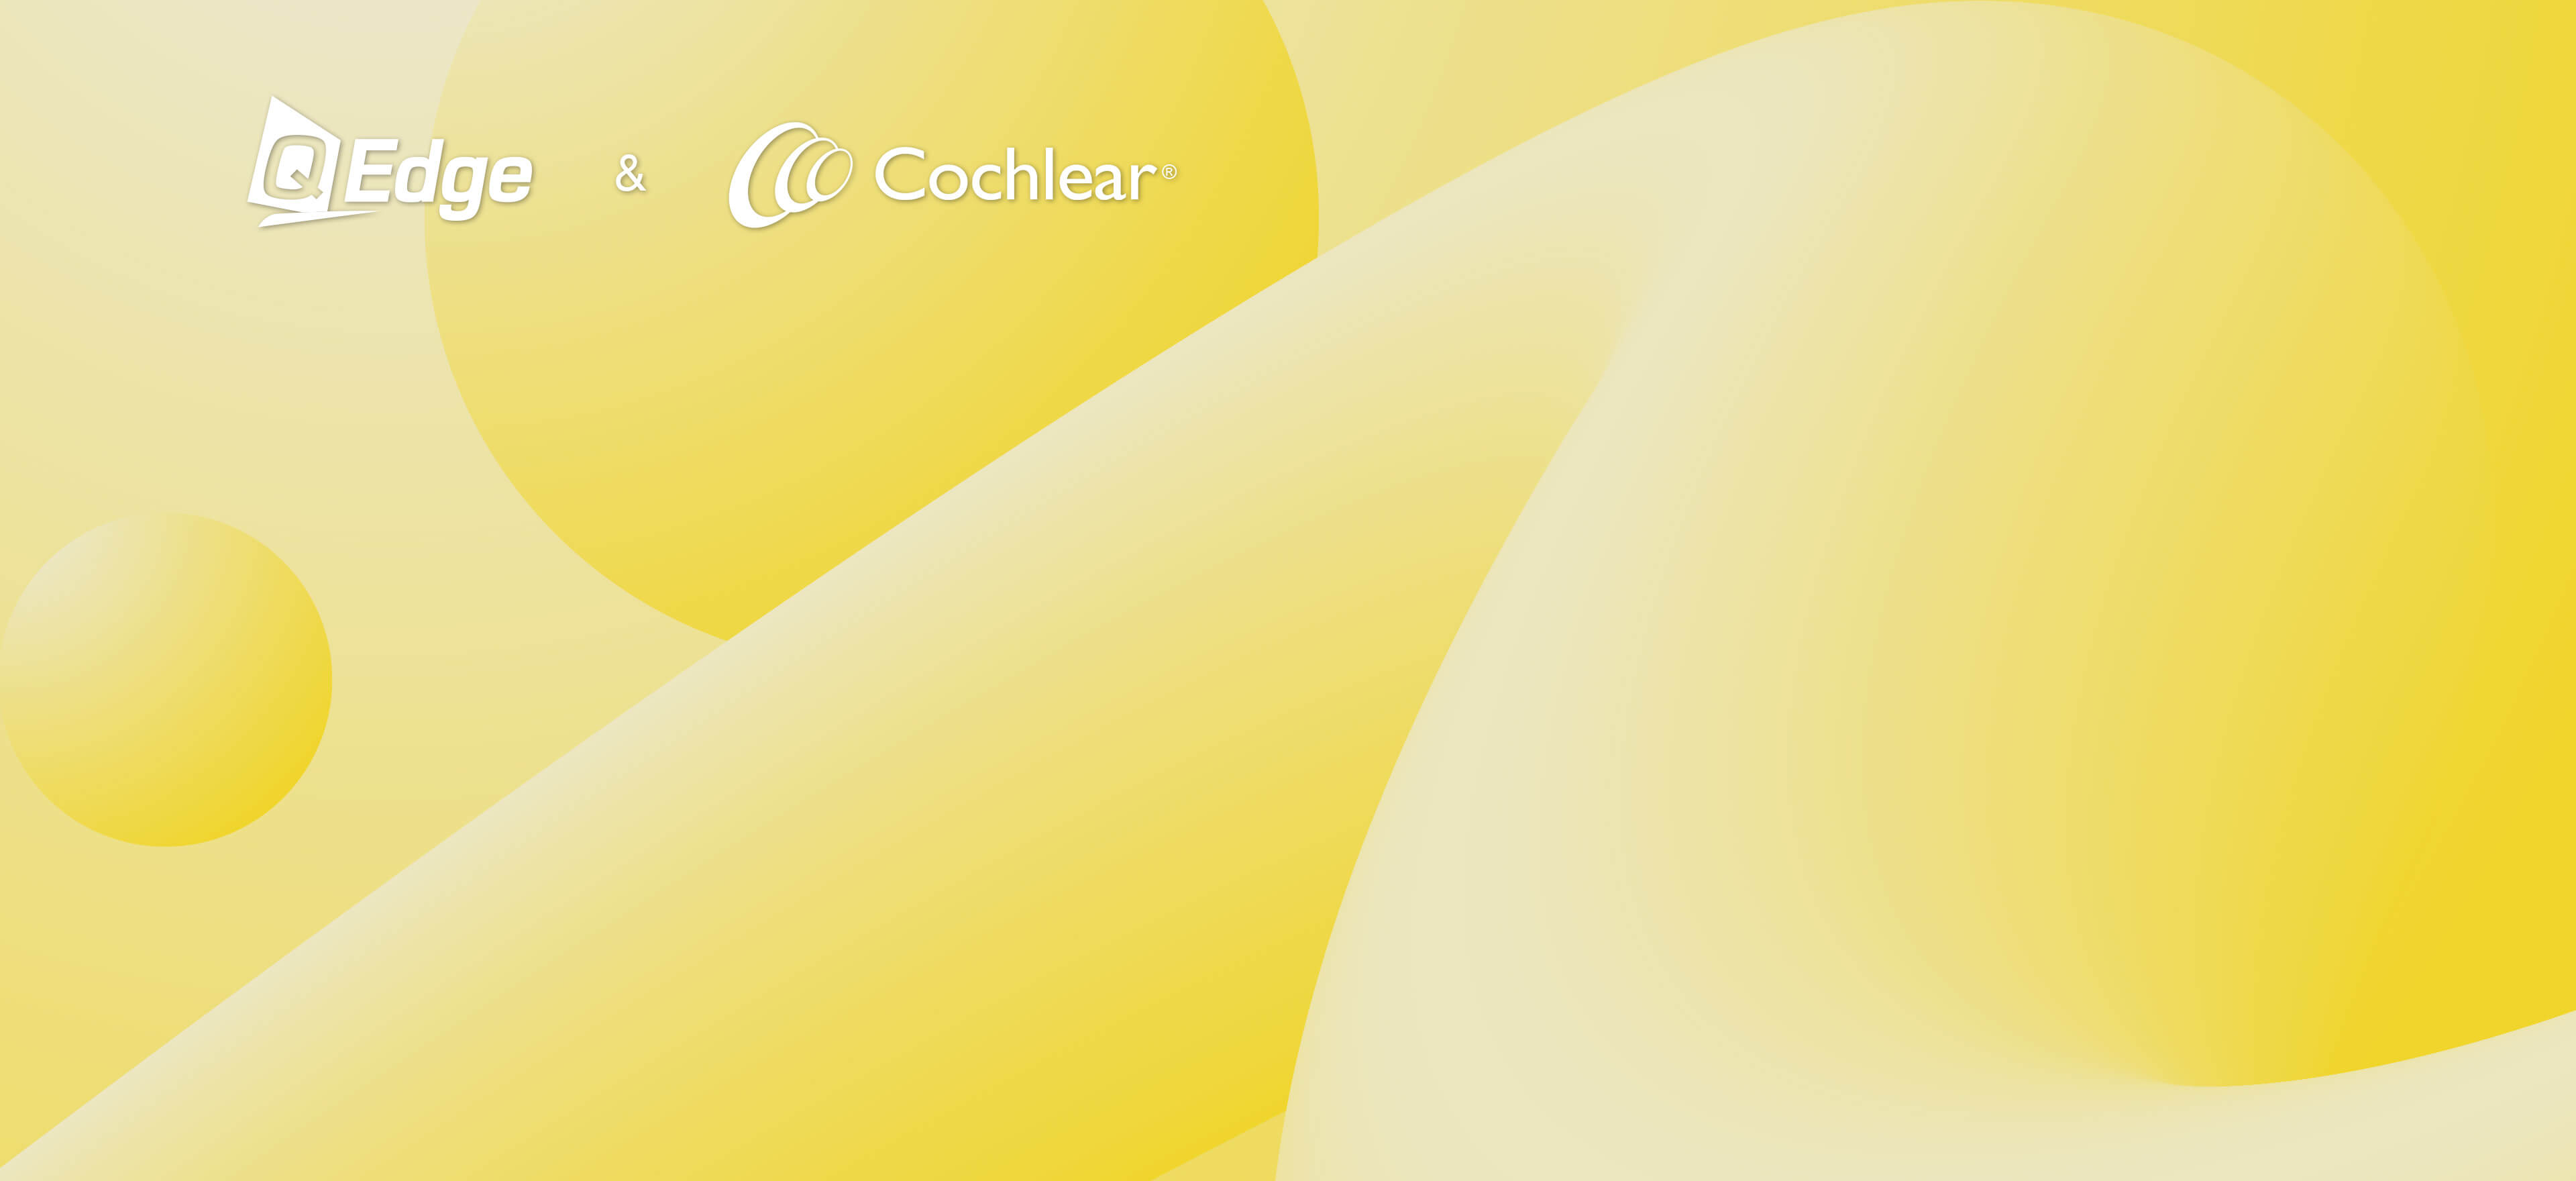 cochlear cooperates with Qedge